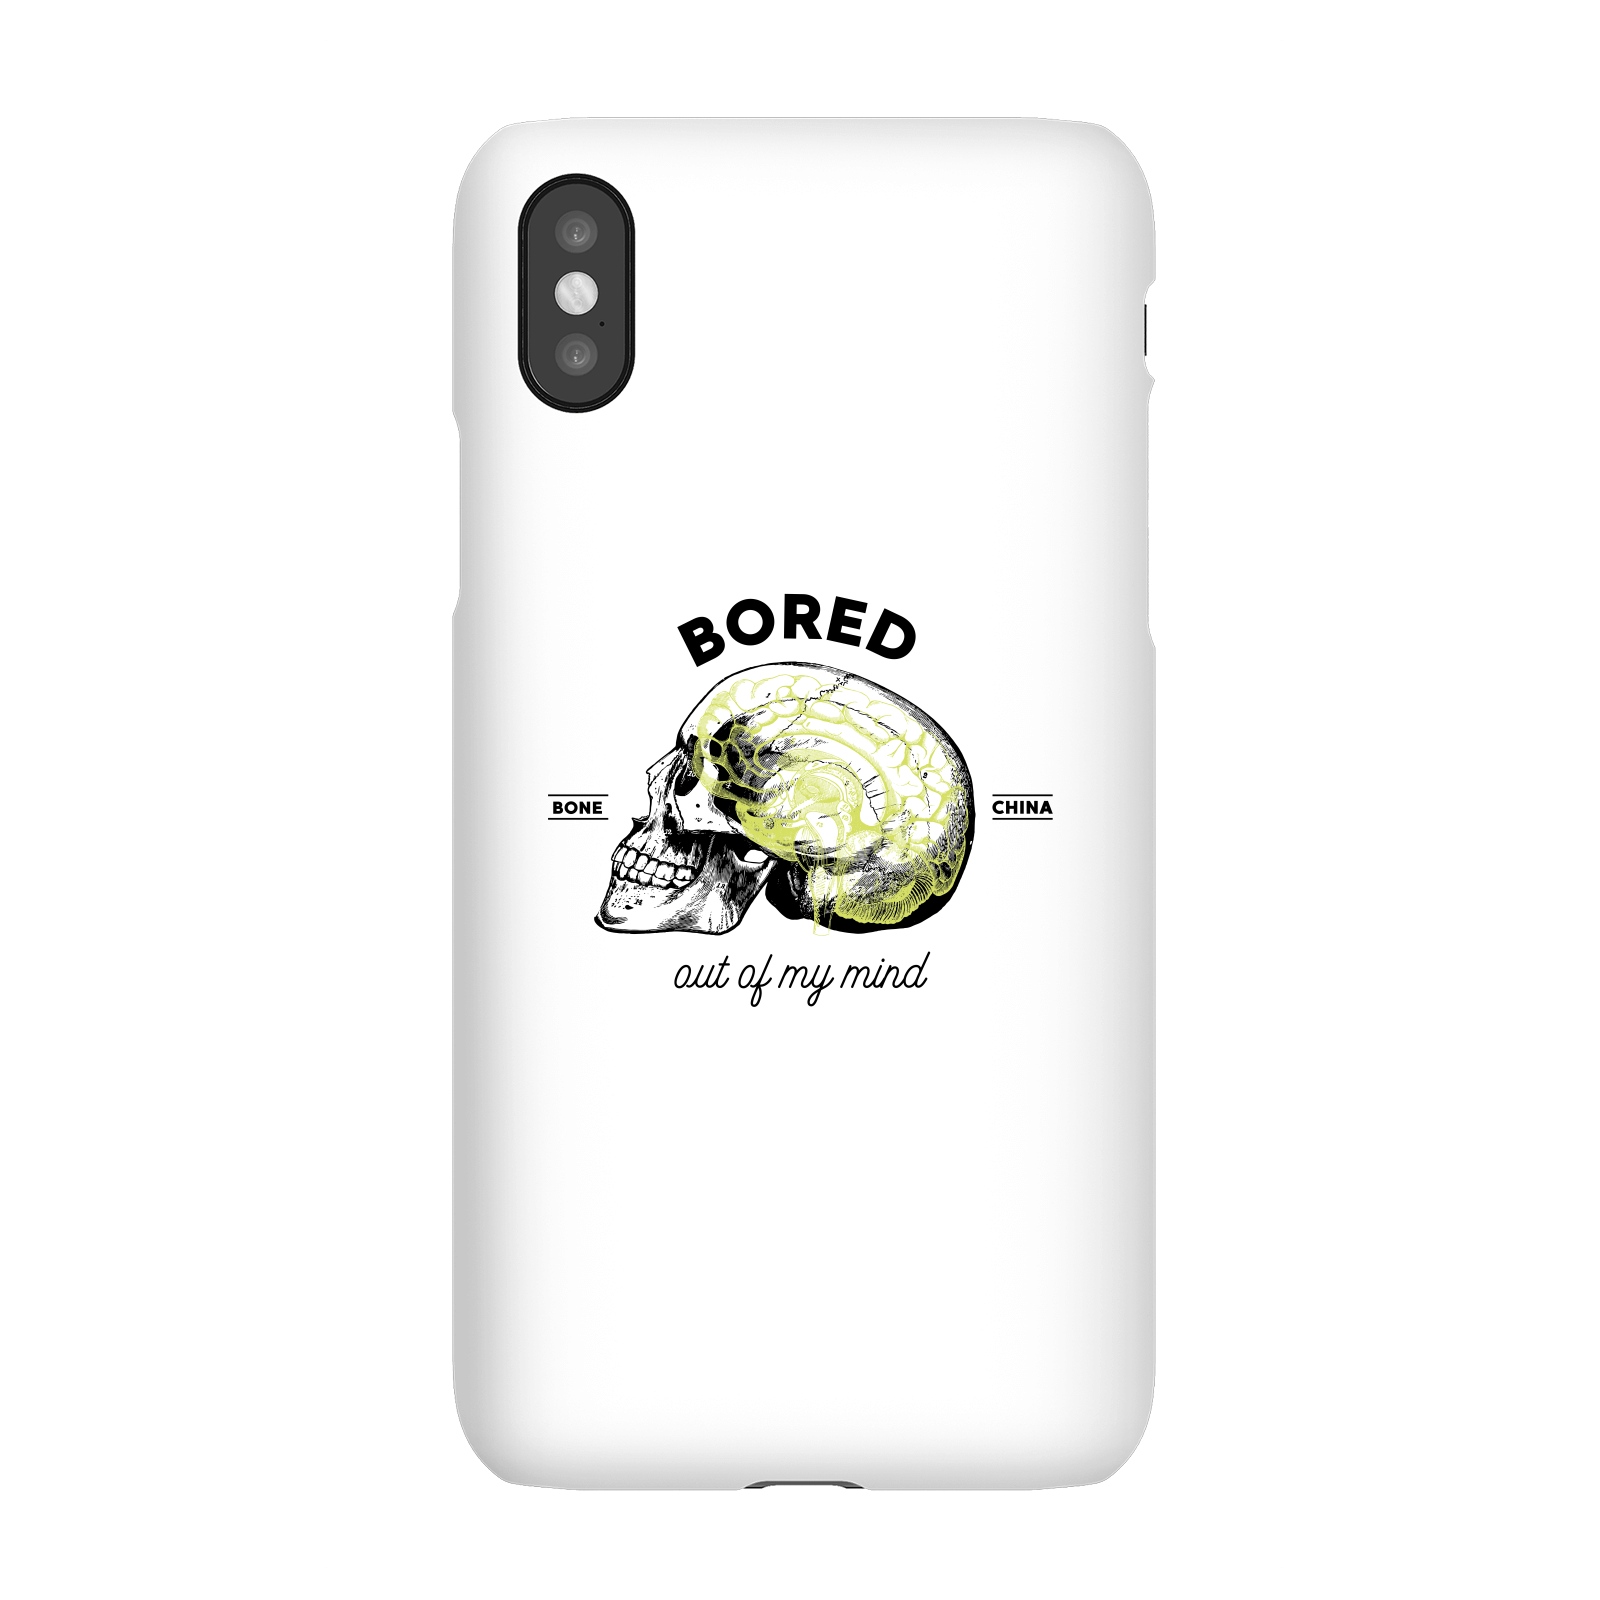 Bored Out Of My Mind Phone Case for iPhone and Android - iPhone 6 - Tough Case - Gloss